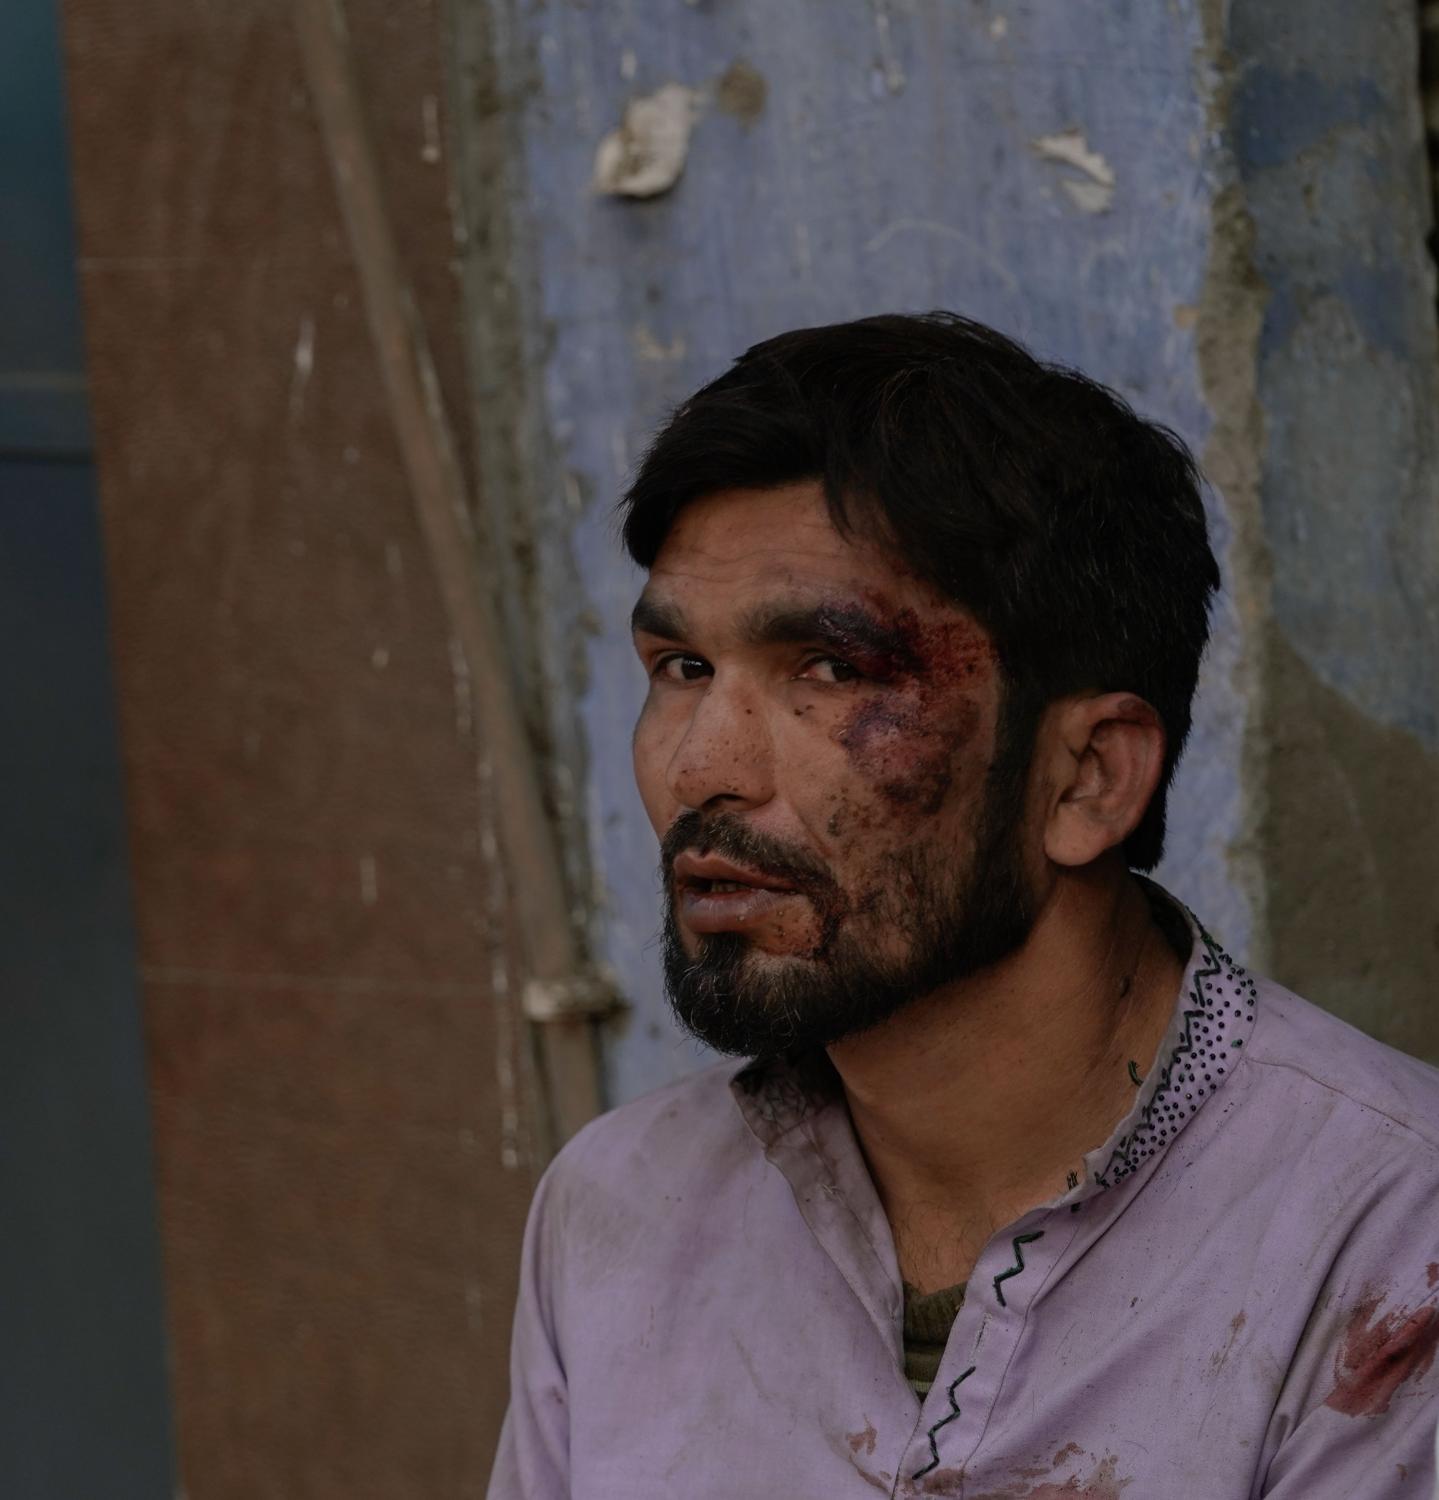 Aazadi - A Muslim man sits down after being beaten by far-right...